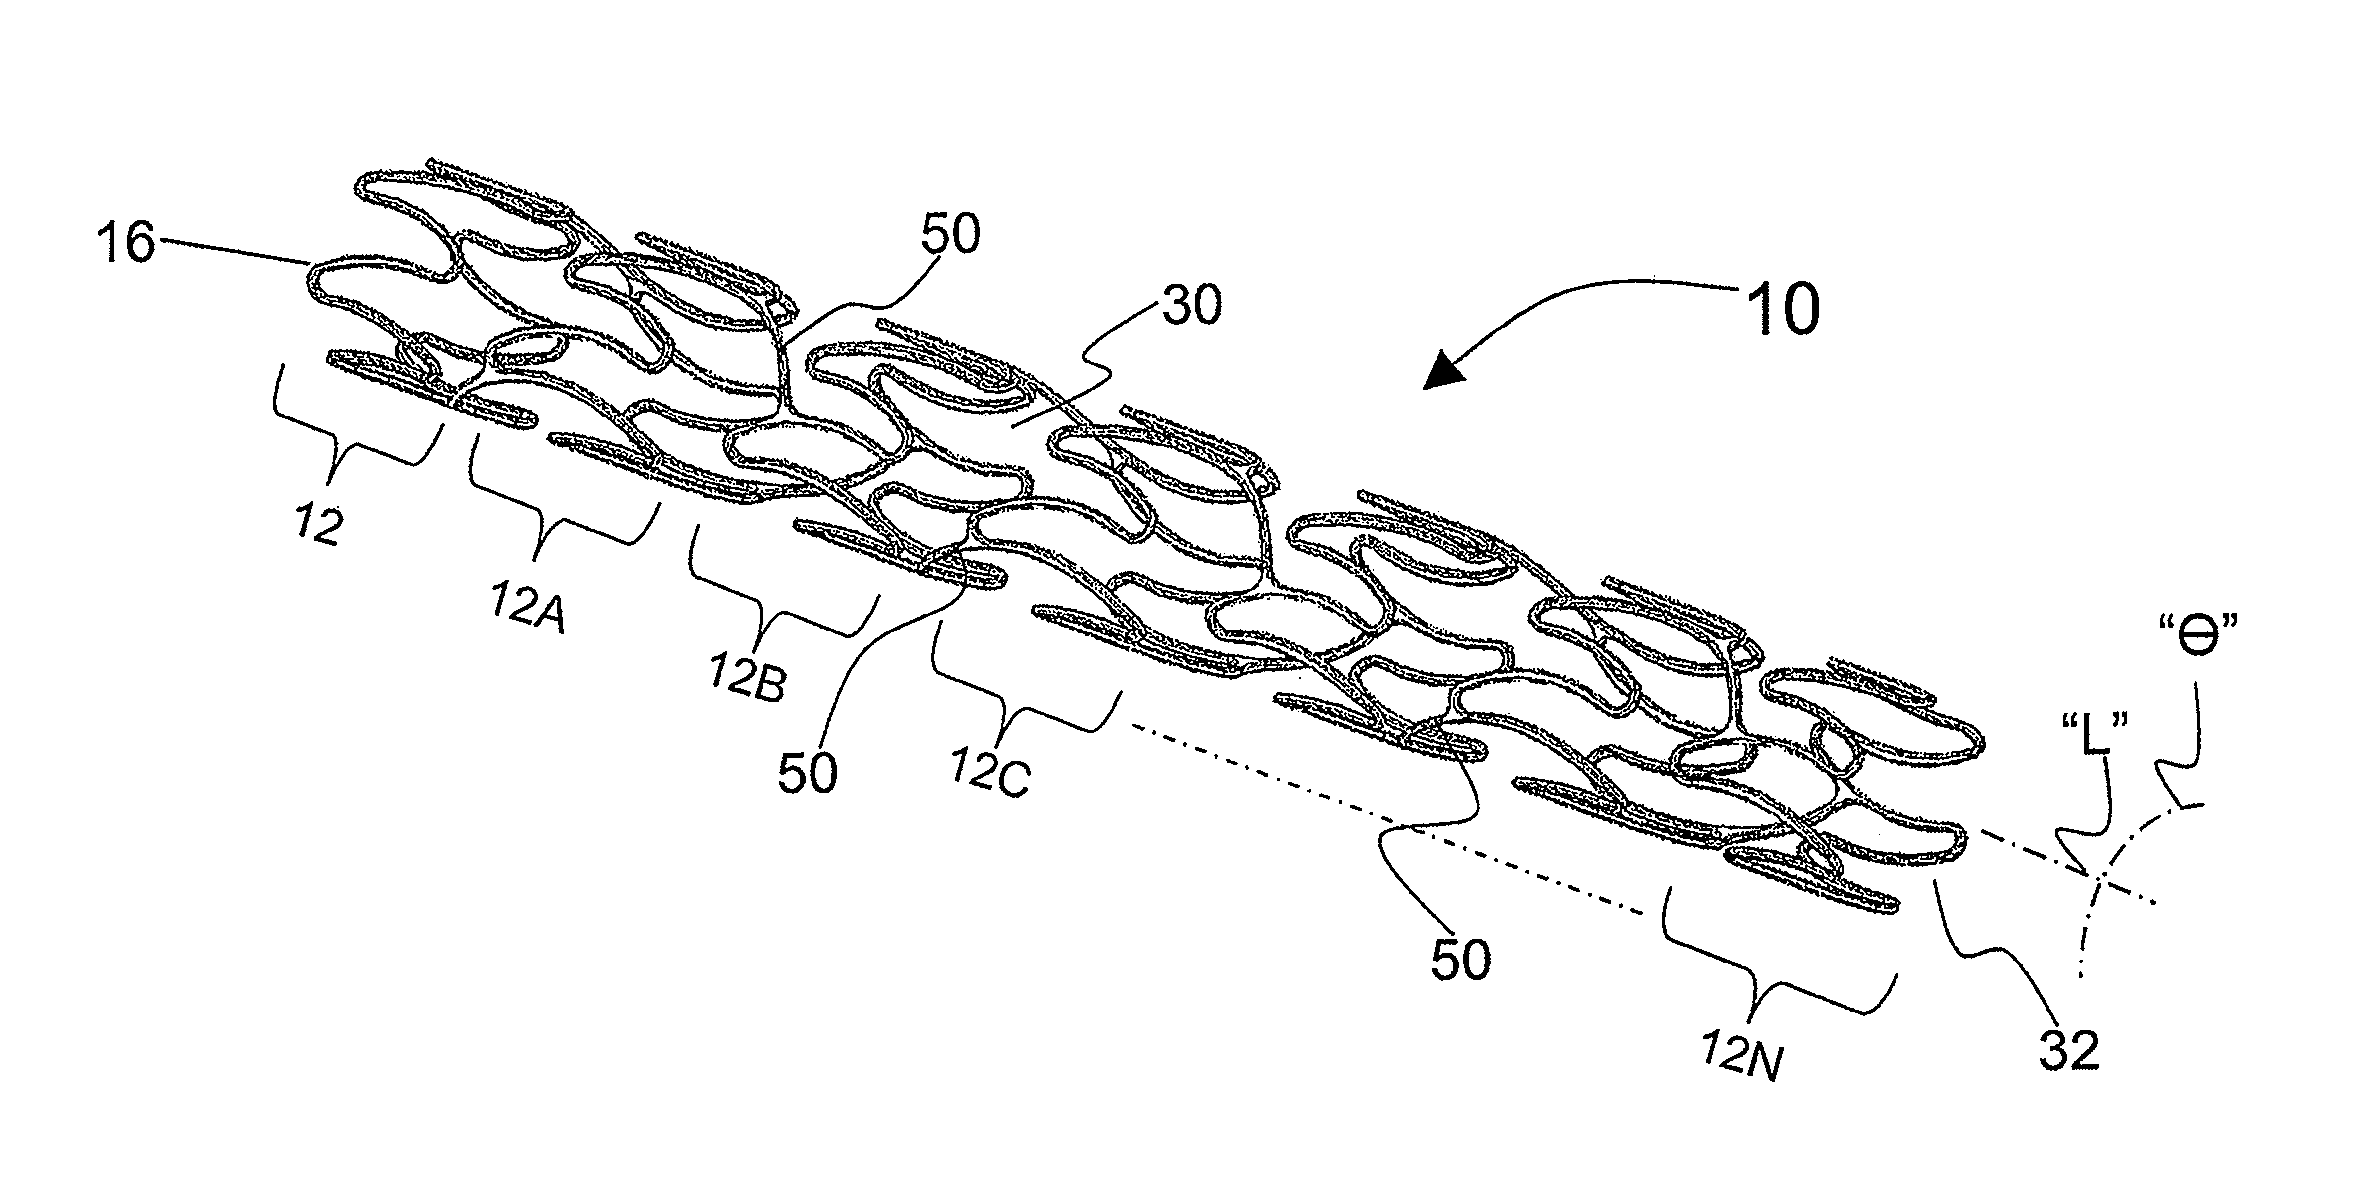 Flexible extendable stent and methods of surface modification therefor